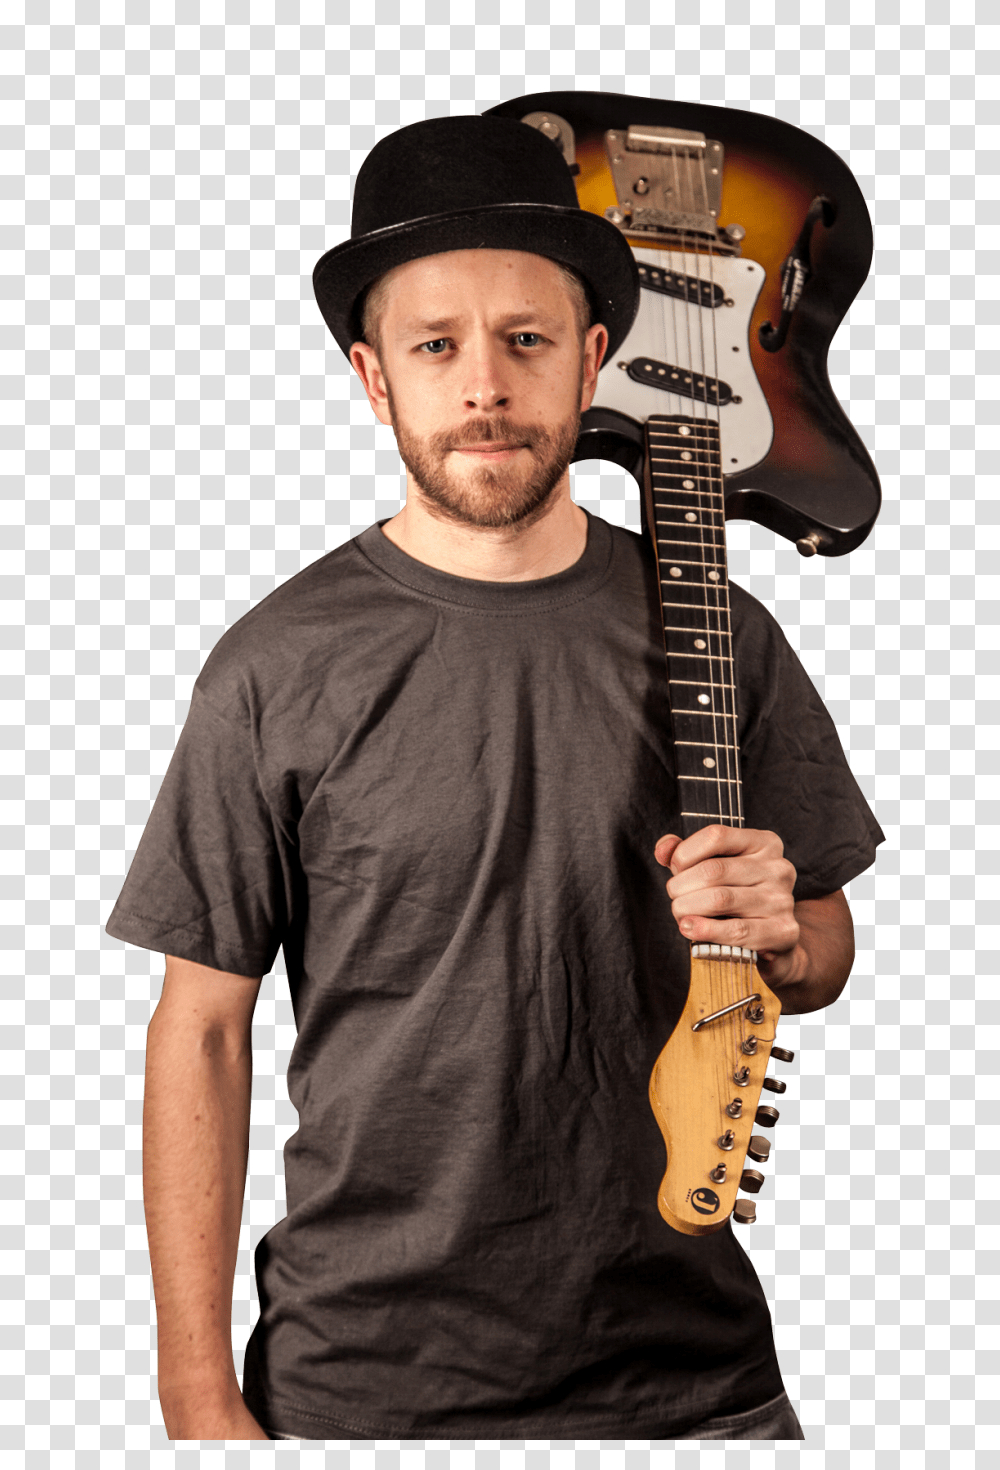 Guitarist Stand And Holds A Guitar Image, Person, Human, Leisure Activities, Musical Instrument Transparent Png